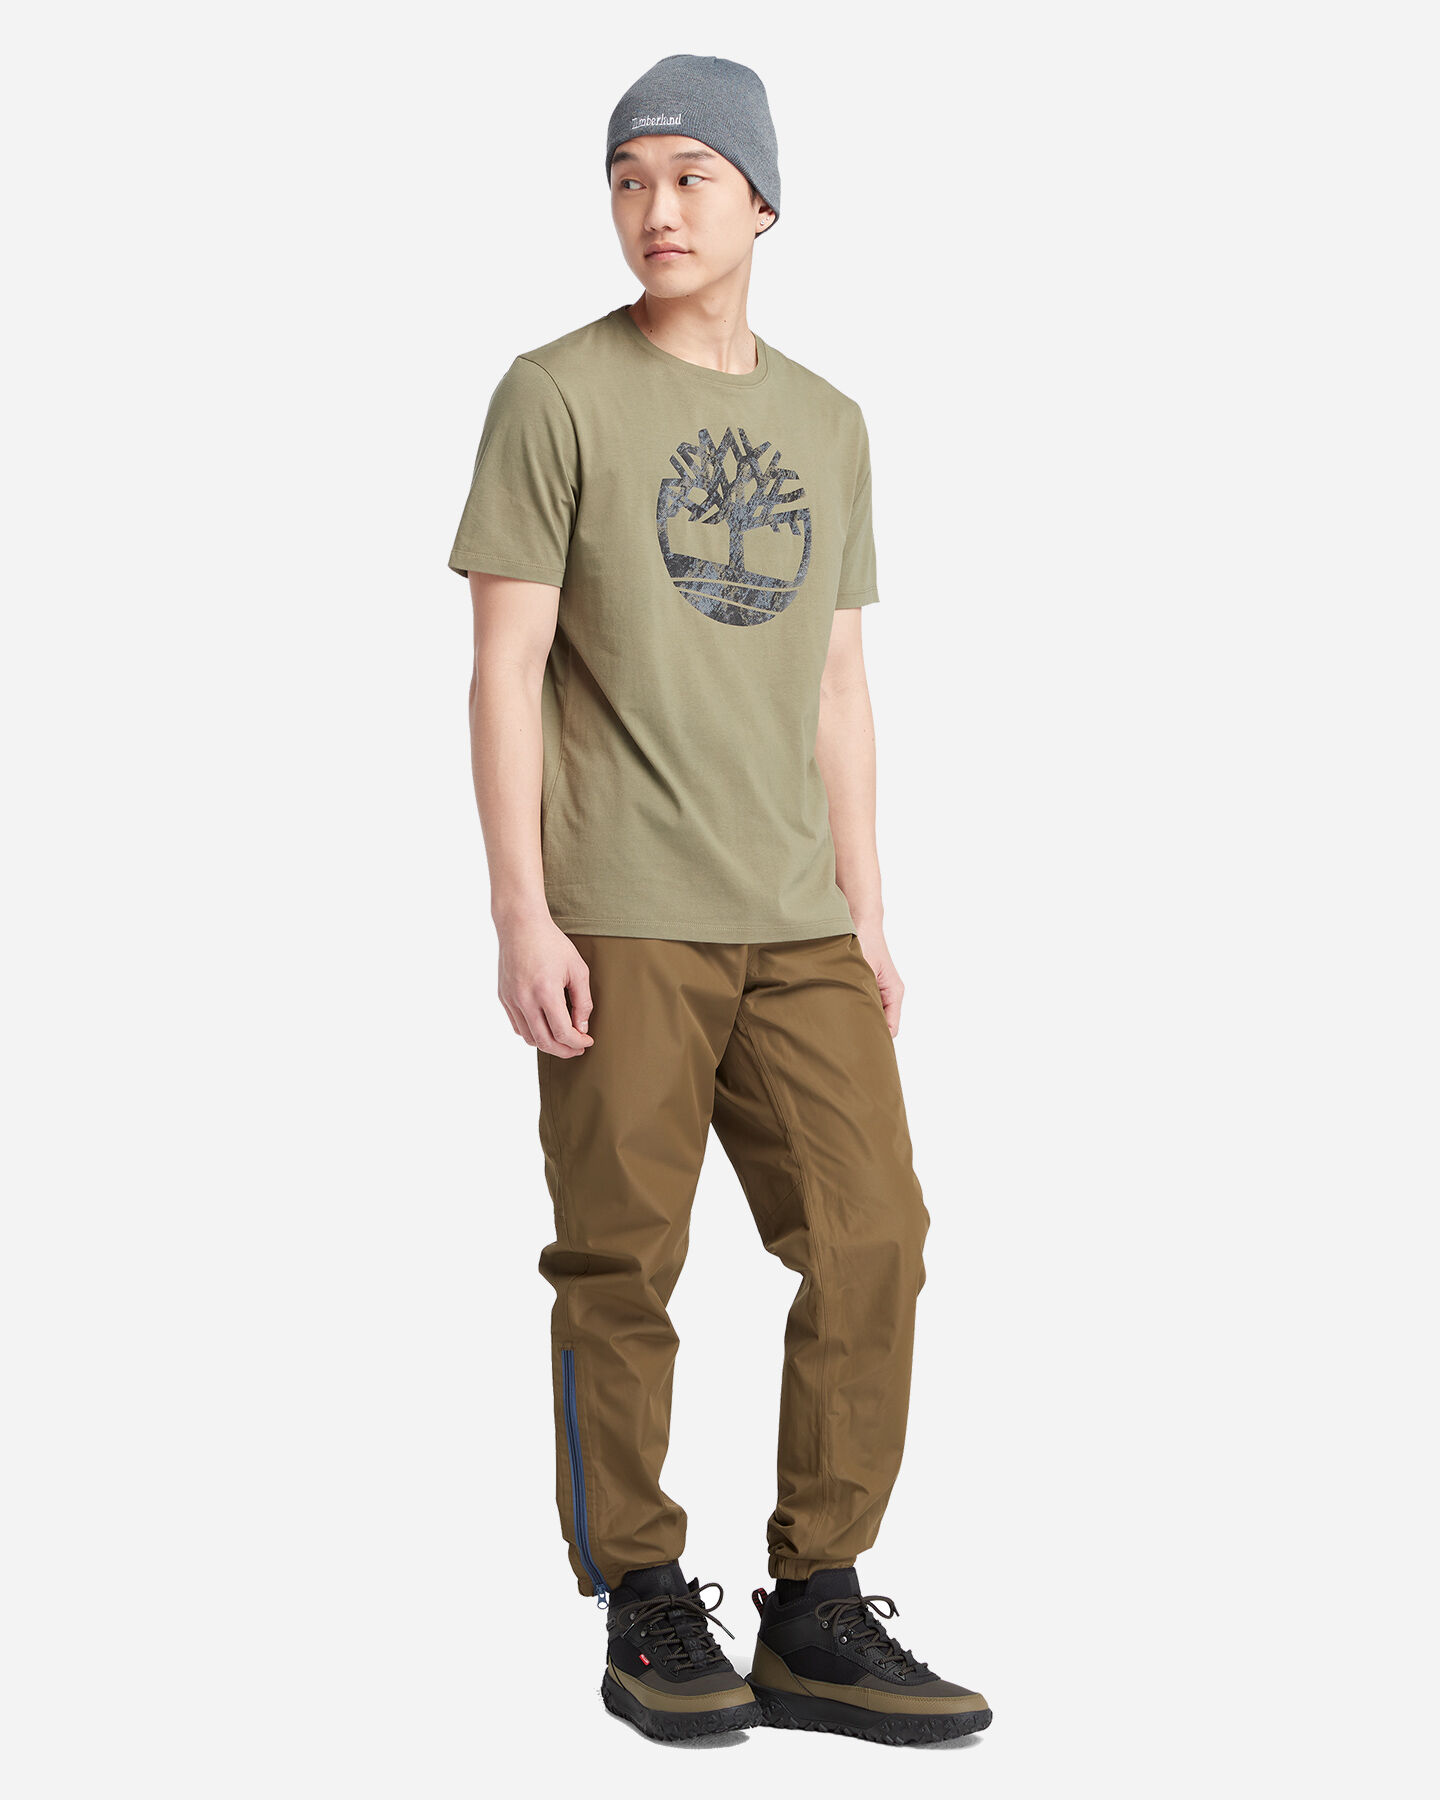  T-Shirt TIMBERLAND CAMO TREE M S4127278|5901|S scatto 5